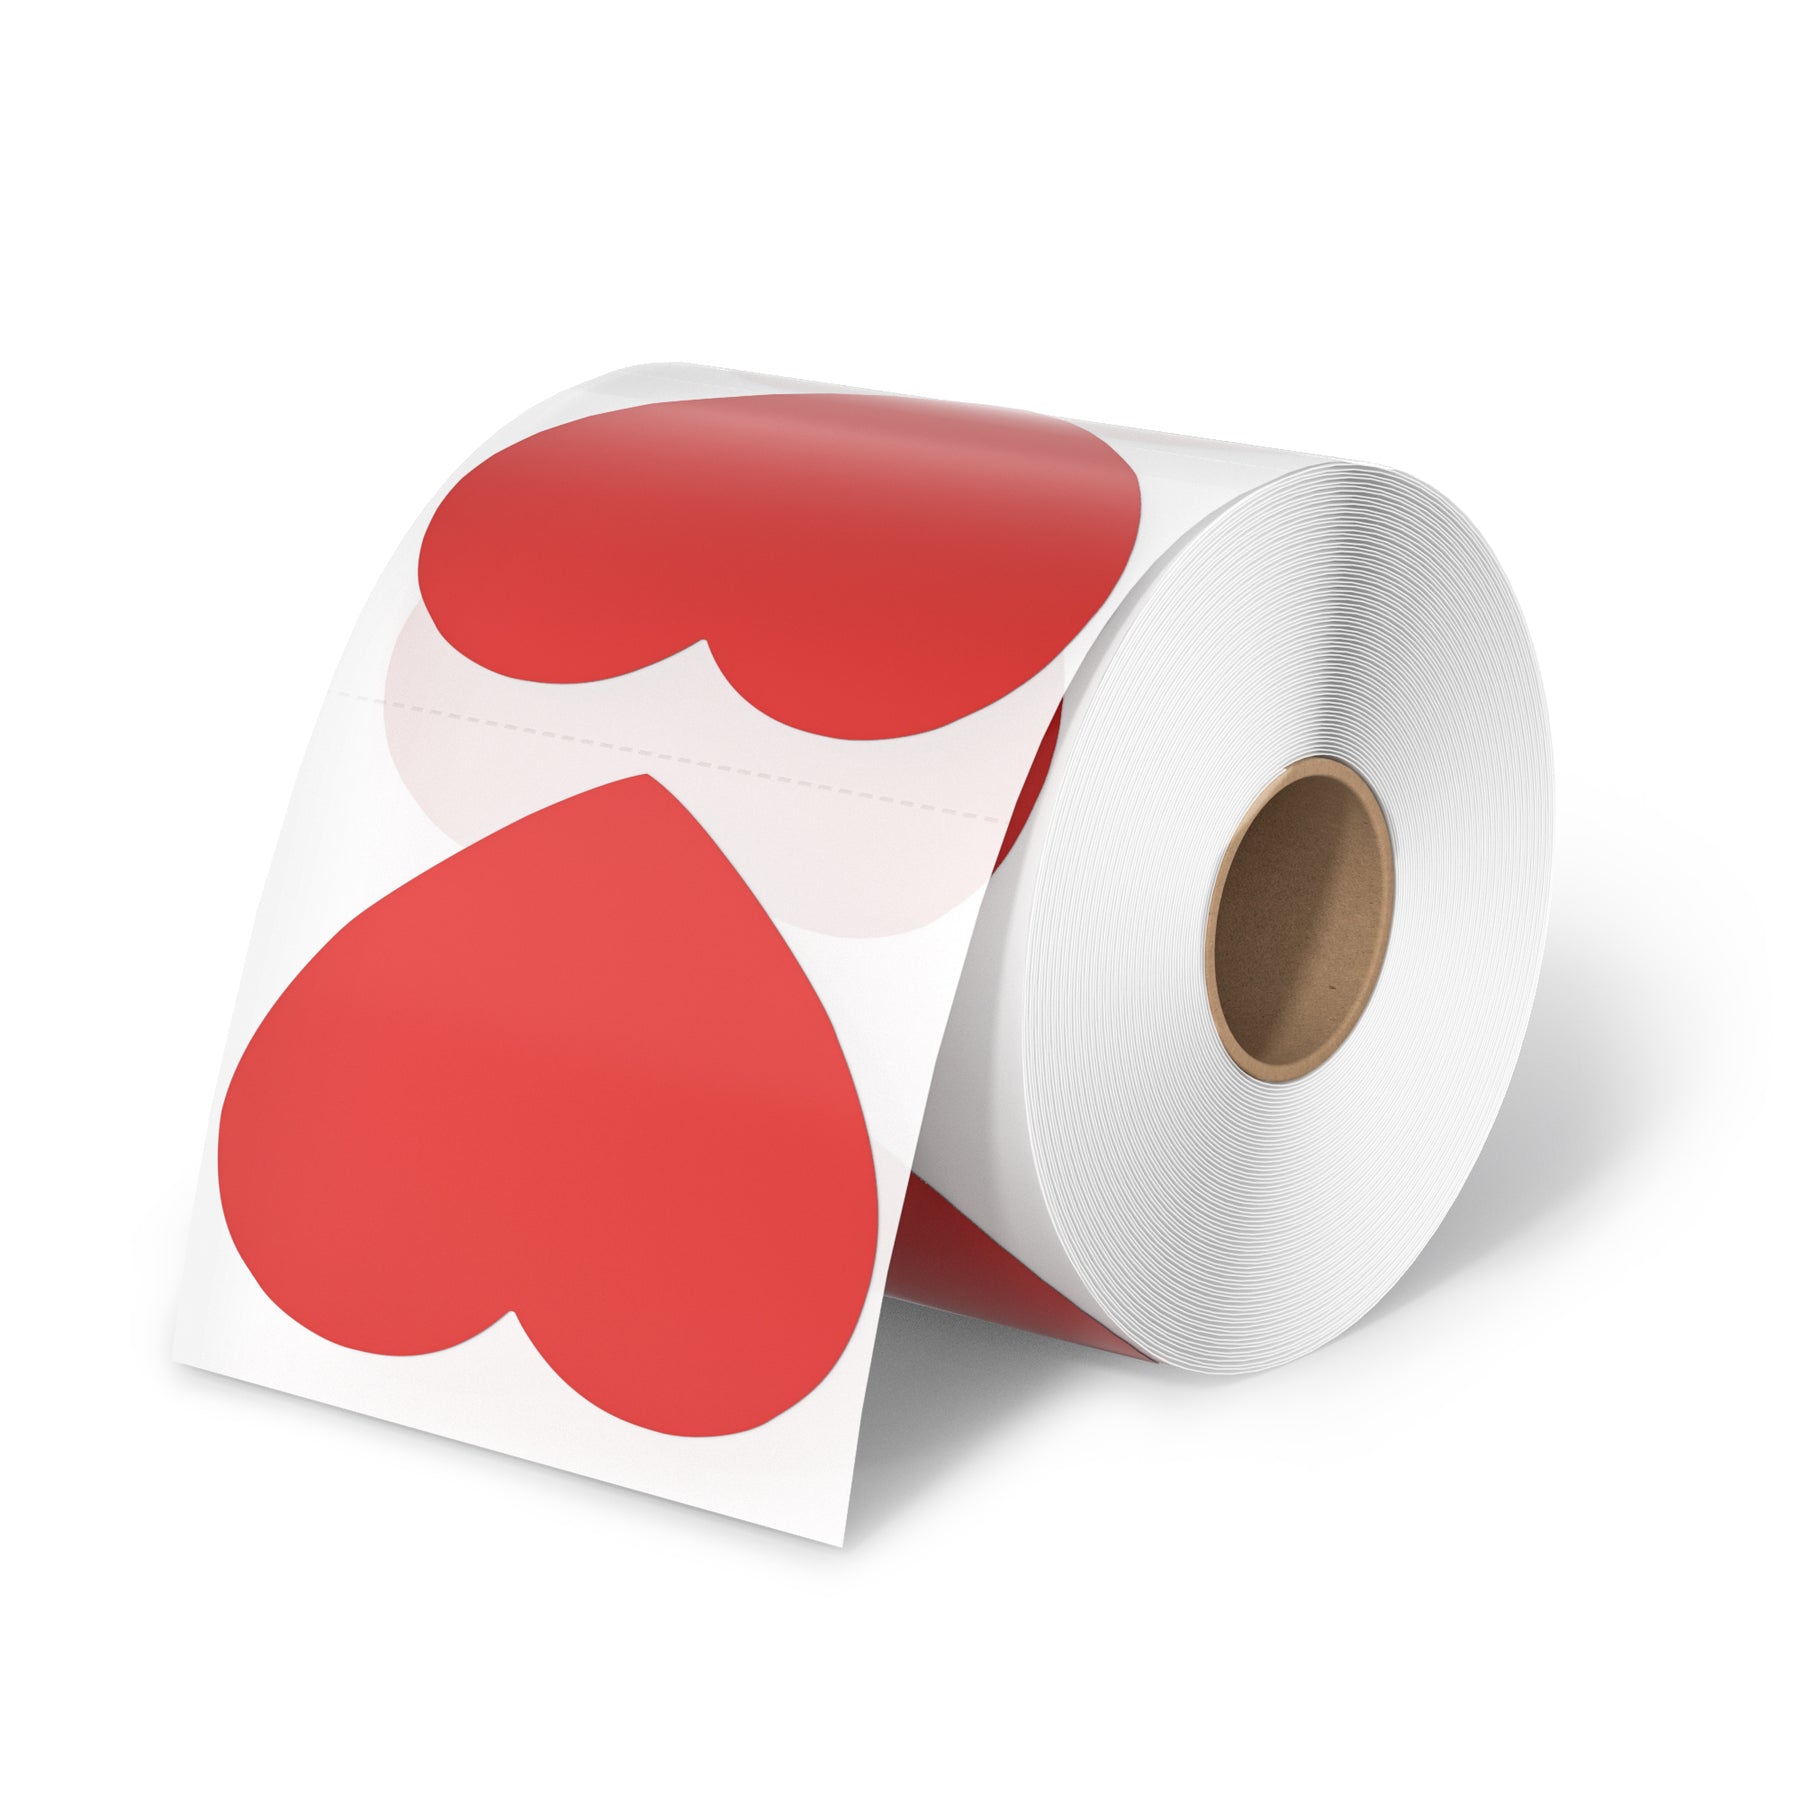 MUNBYN red heart thermal labels are the perfect solution for product labeling and organization.